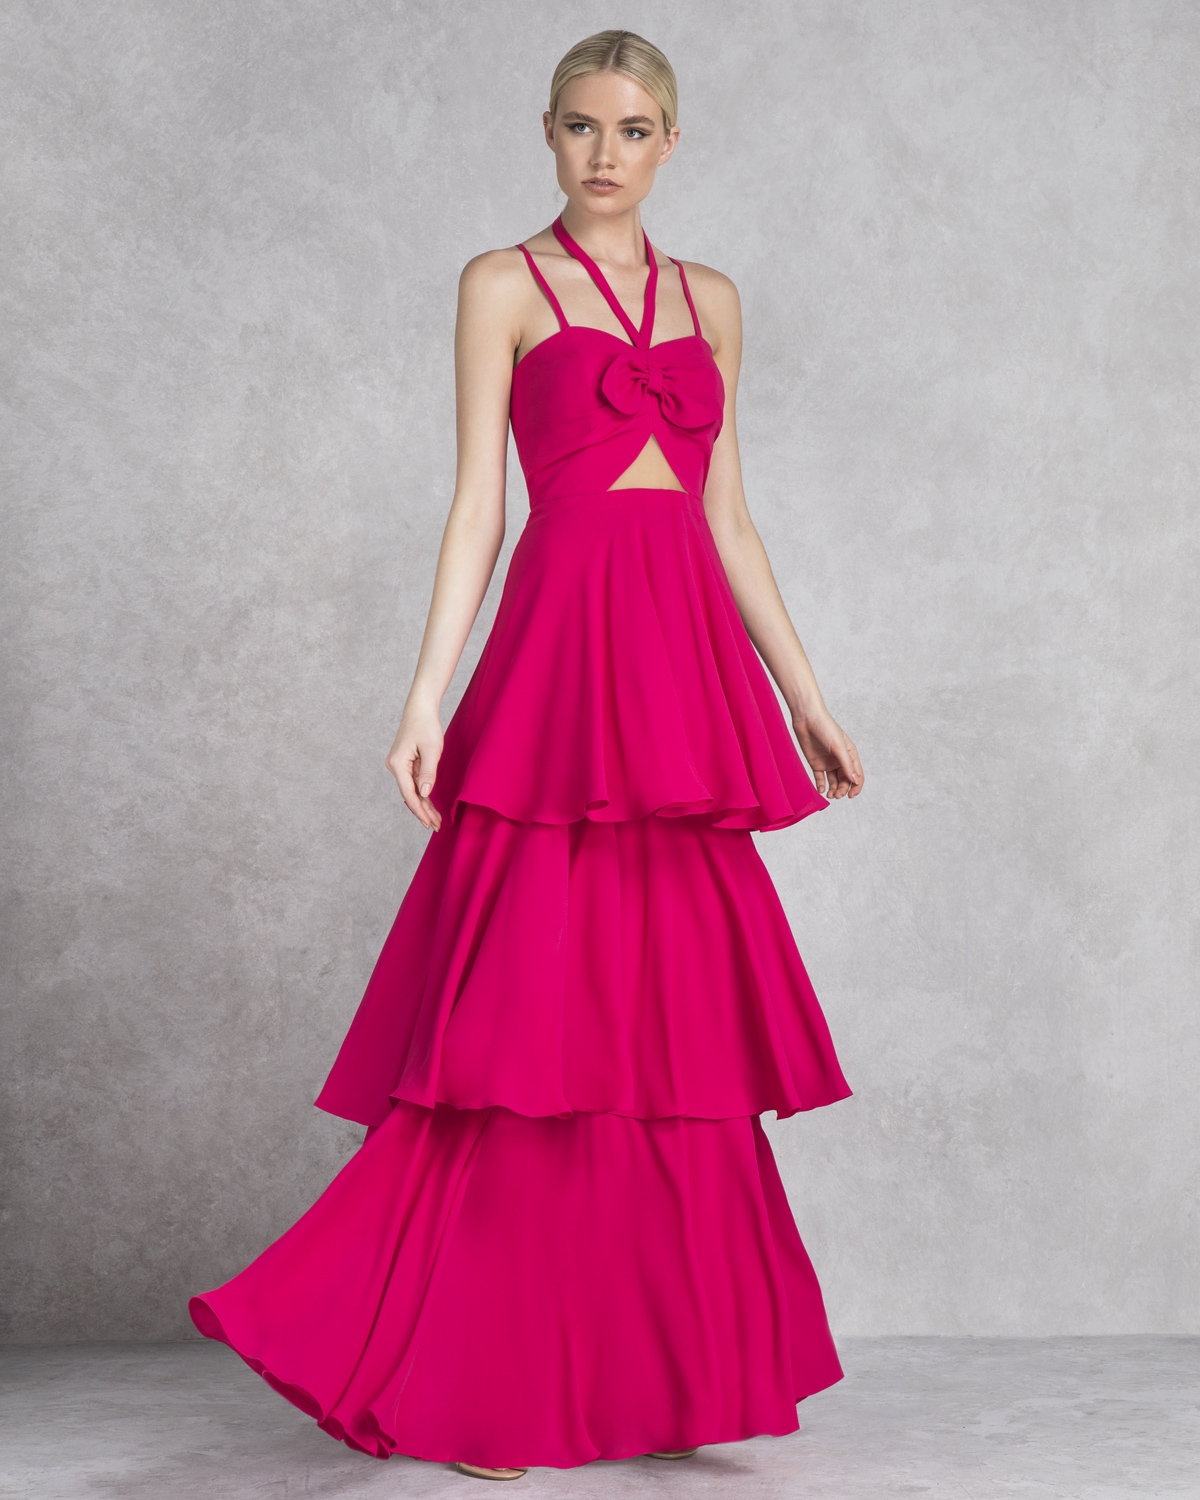 Cocktail Dresses / Cocktail dress with ruffles and bow